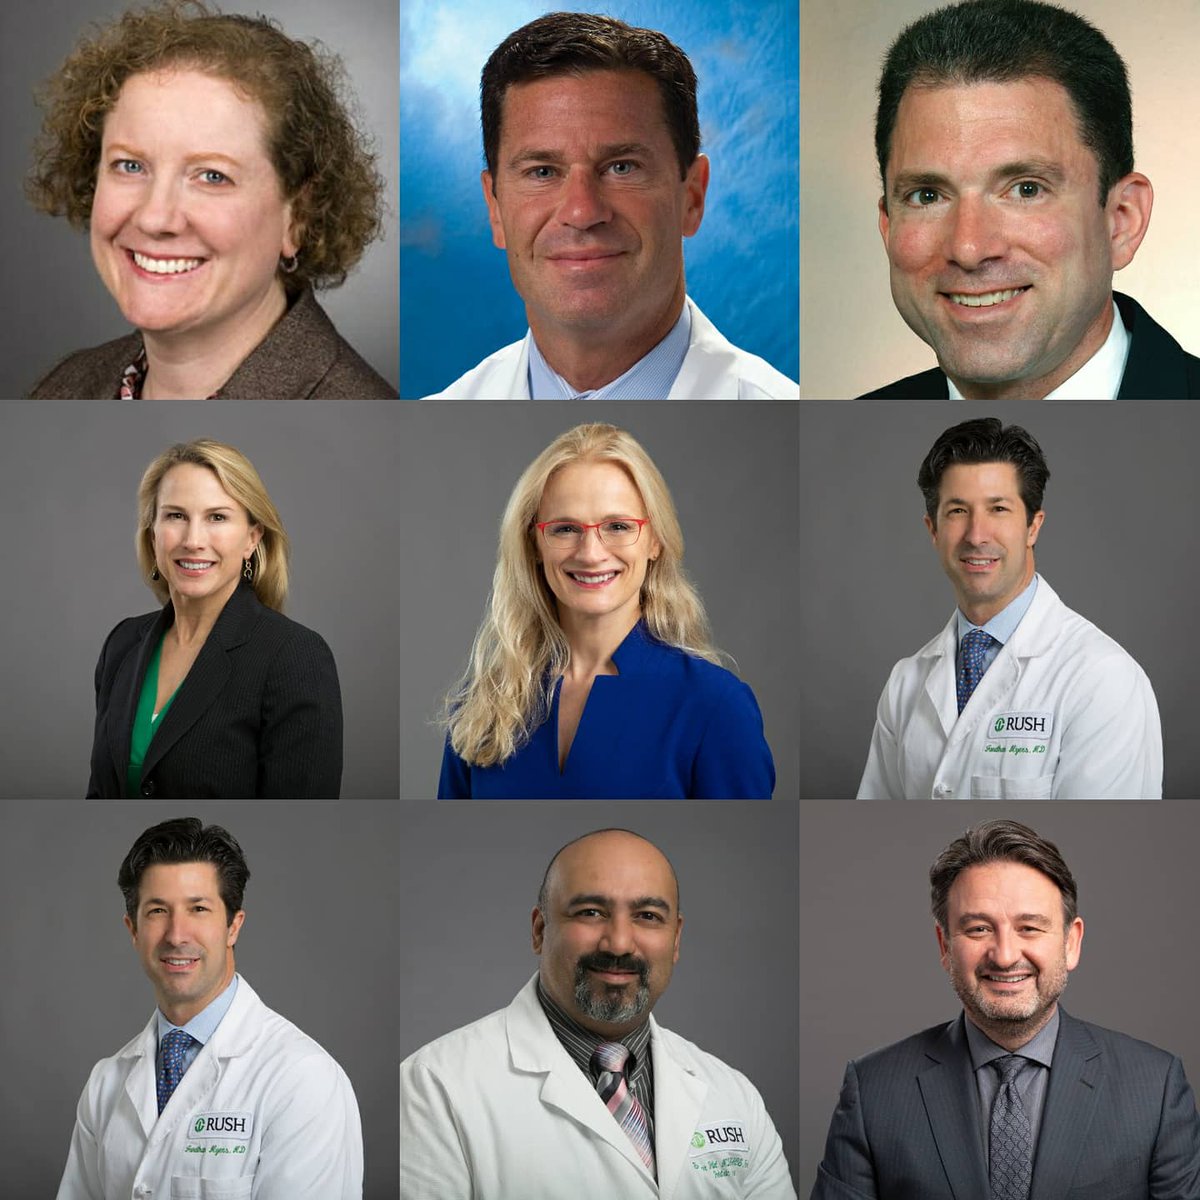 Happy Doctor's Day to all doctors especially our #RAB members! Thank you all for making our health a priority to care for.

Not pictured: Dr. Alisha Bhatia, Dr. Kathleen Weber, Dr. Richa Singh
#RushExcellence #healthcareheroes #RAB #RUMC